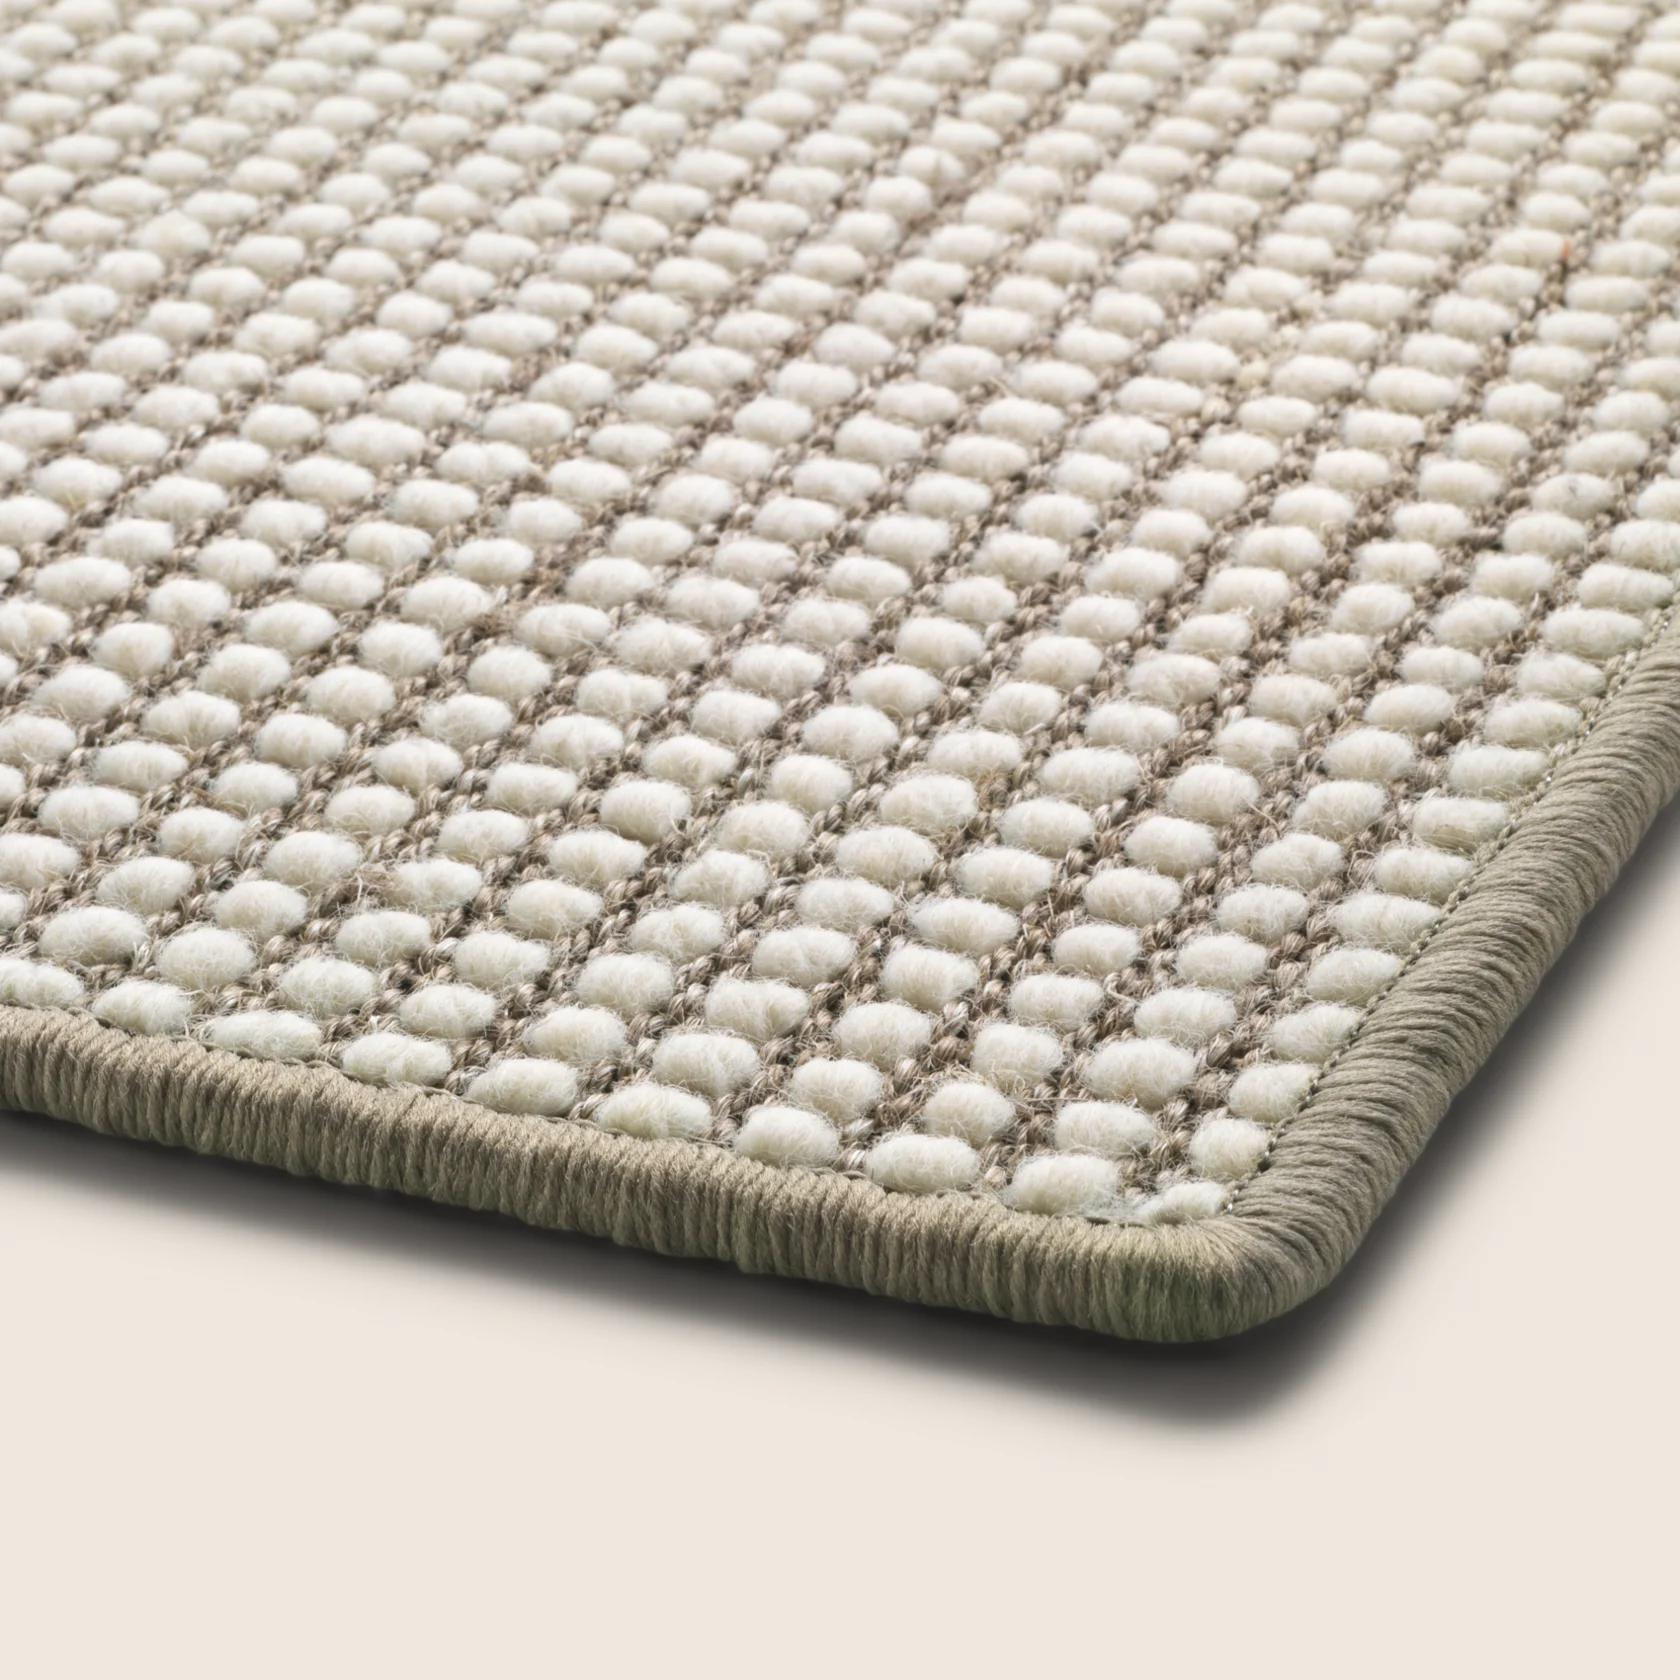 024401_THE RUG_JACOPO 073_ACCESSORIES_--JACOPO 073--.png